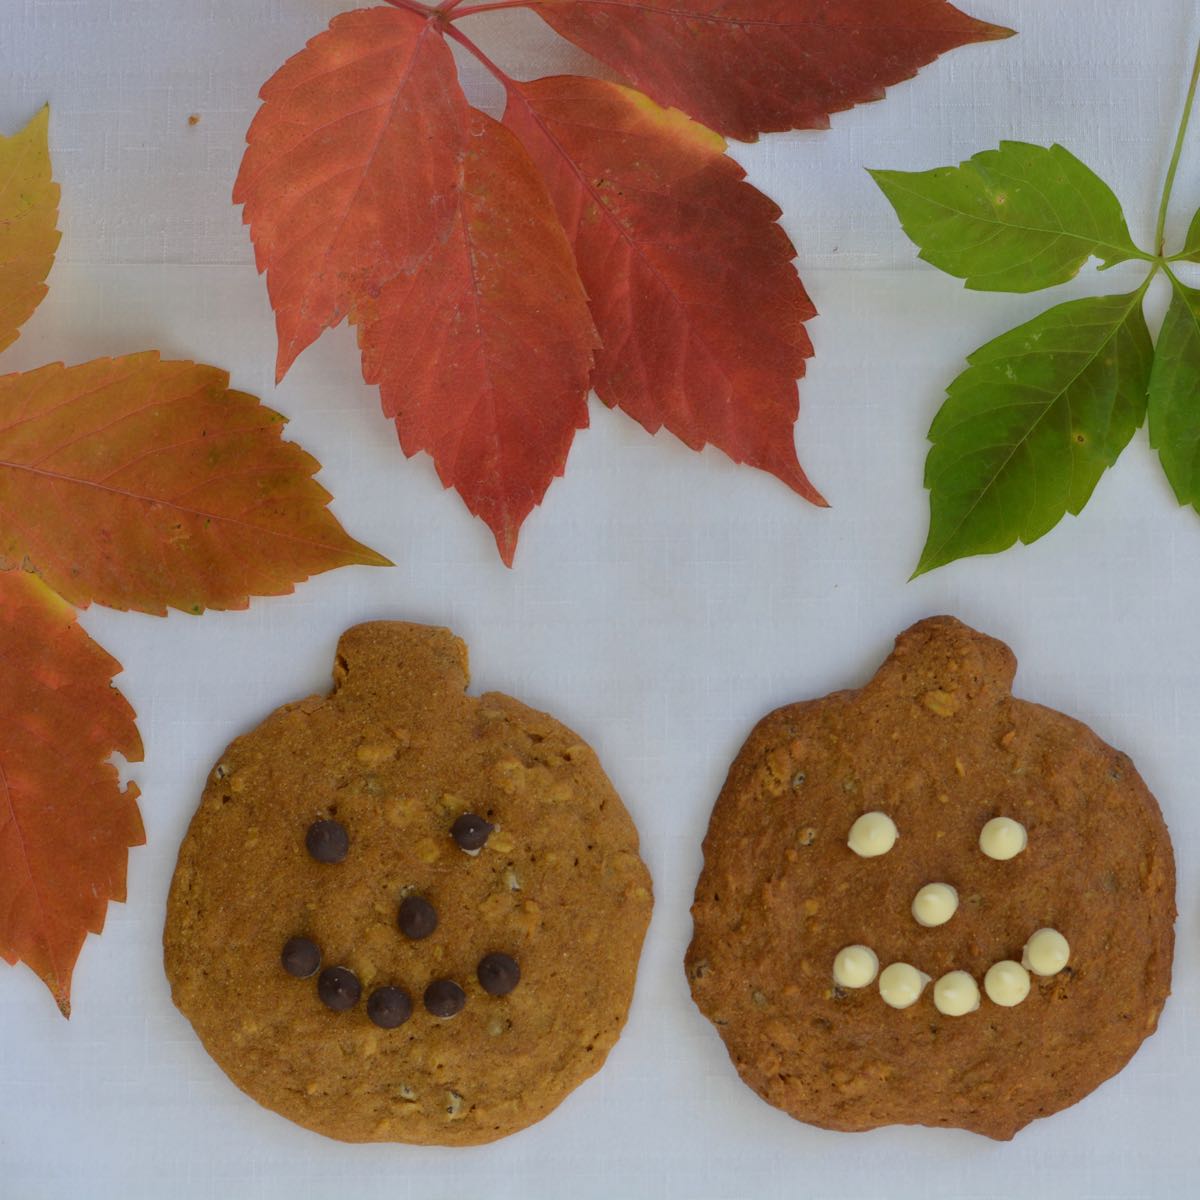 Kids love the chocolate chip freckles in these Pumpkin Chocolate Chip Cookies in the shape of jack-o-lanterns.